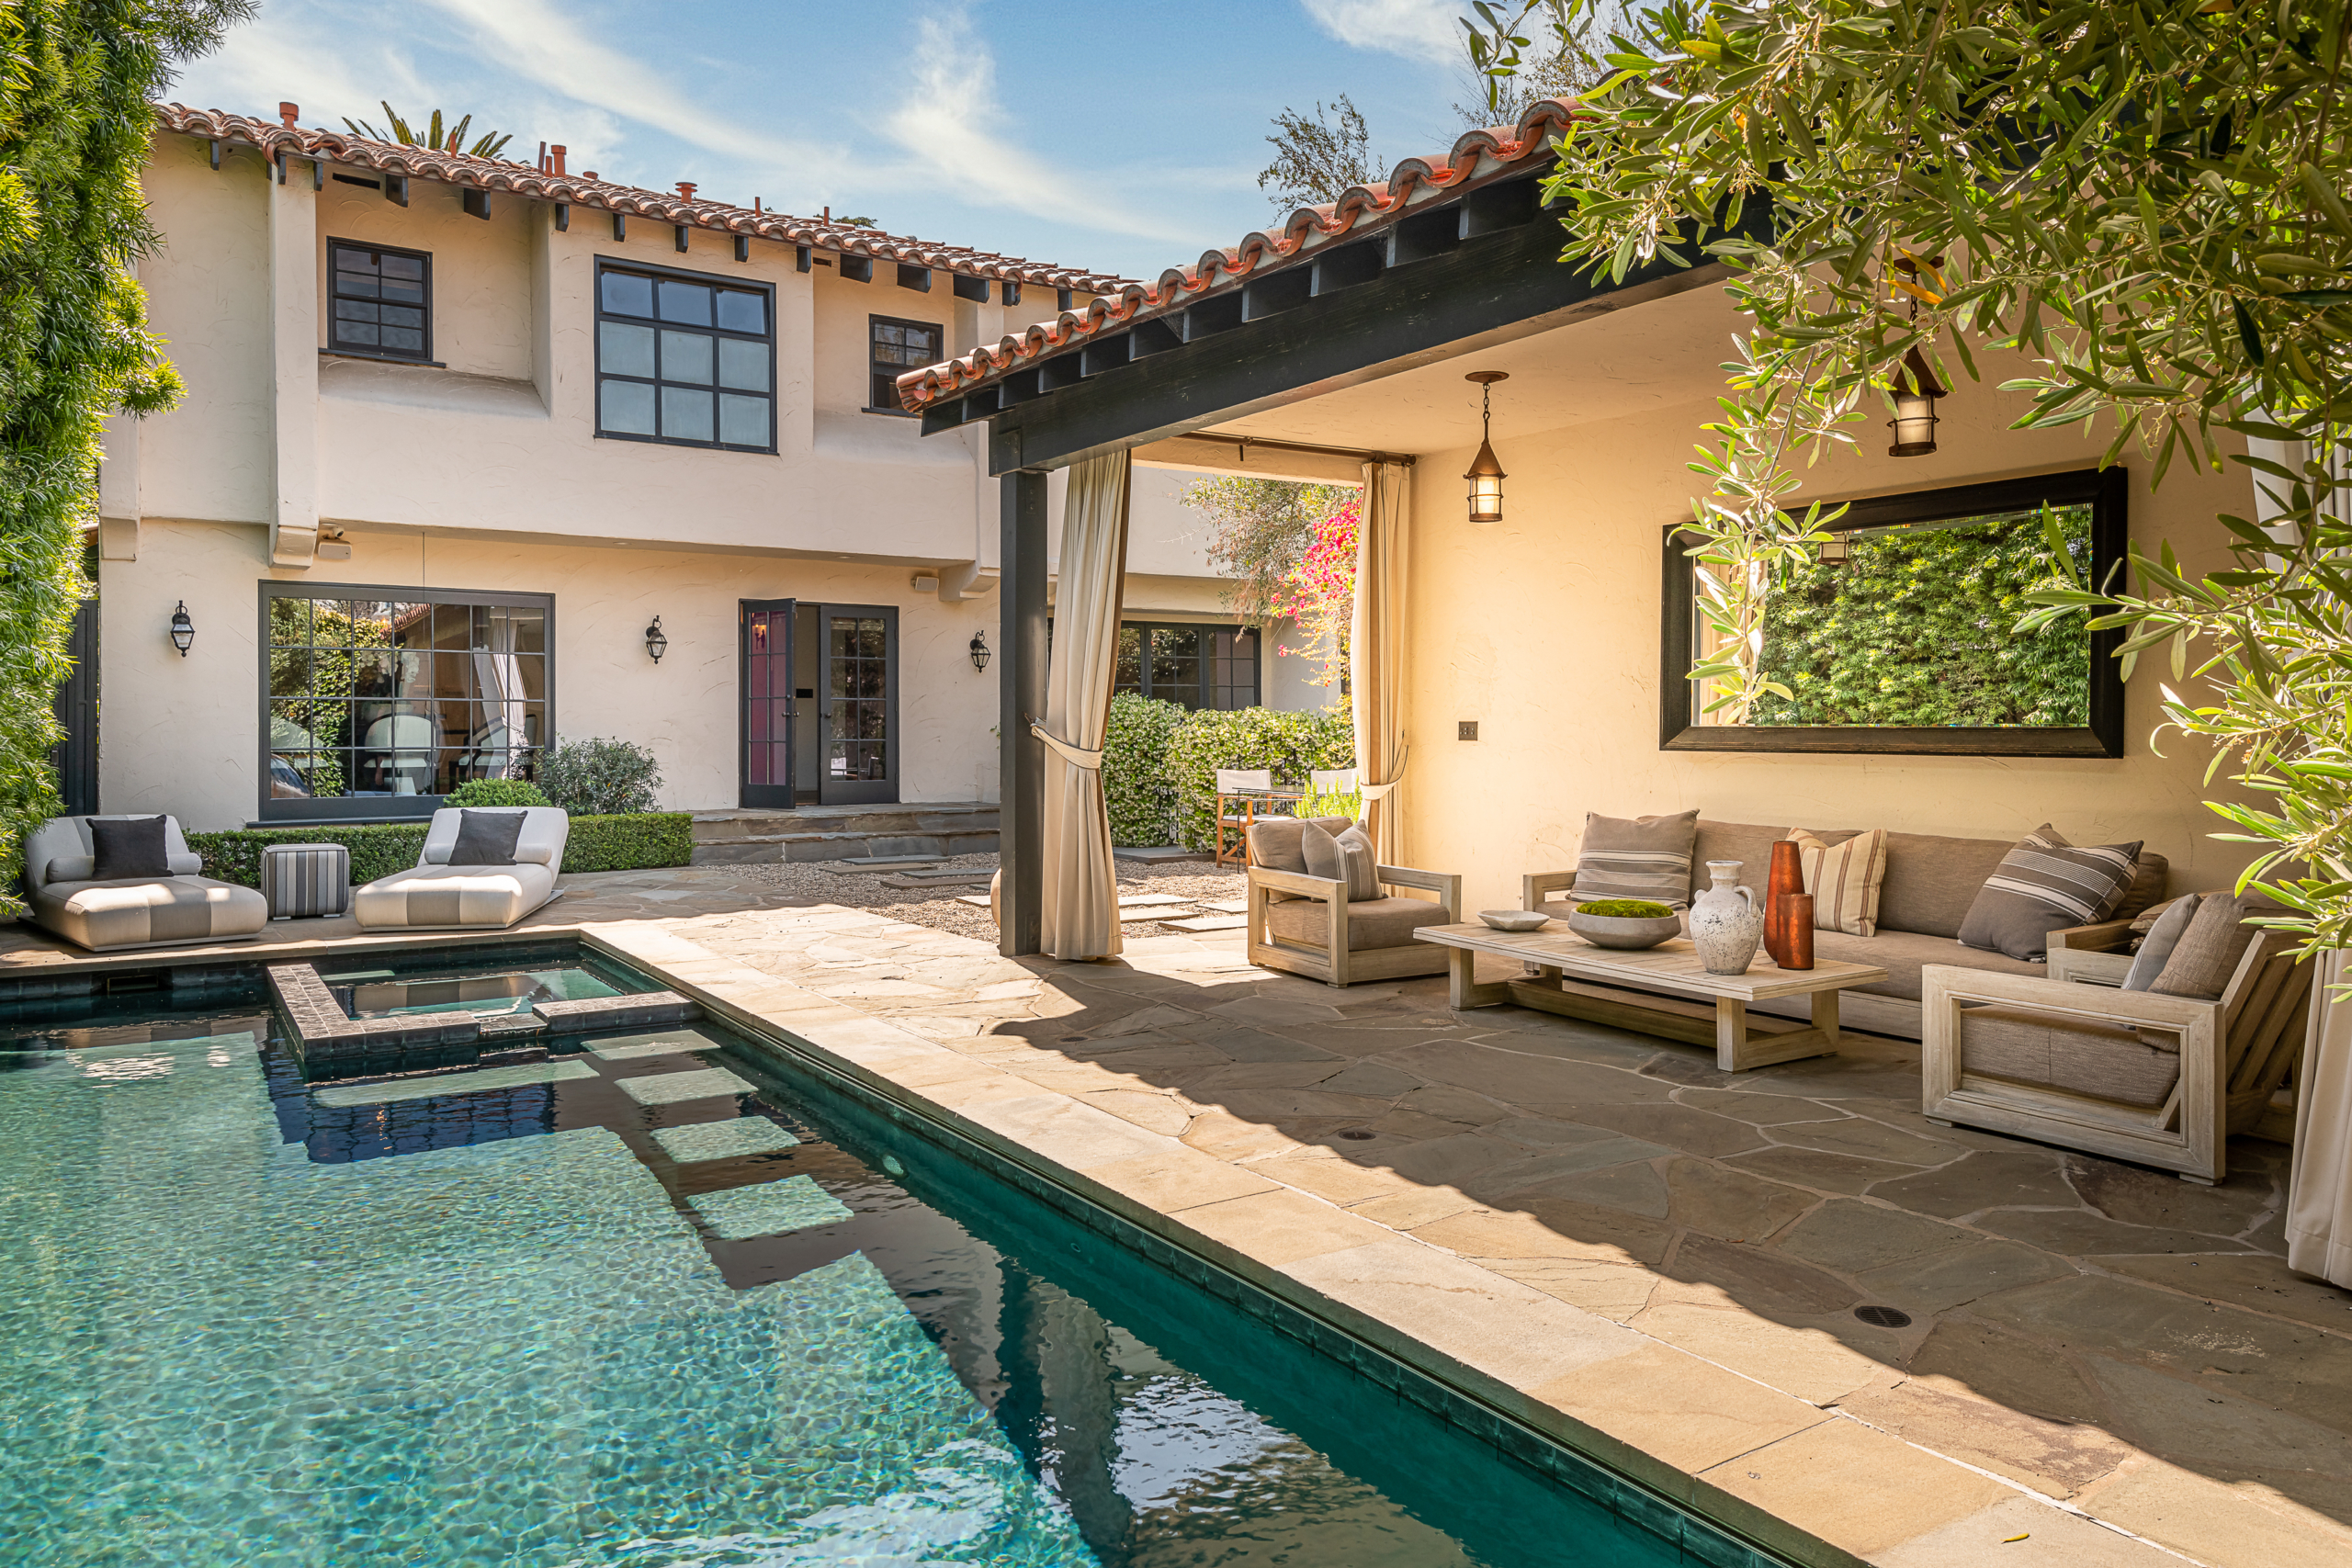 Spanish style home with pool and large stone patio area